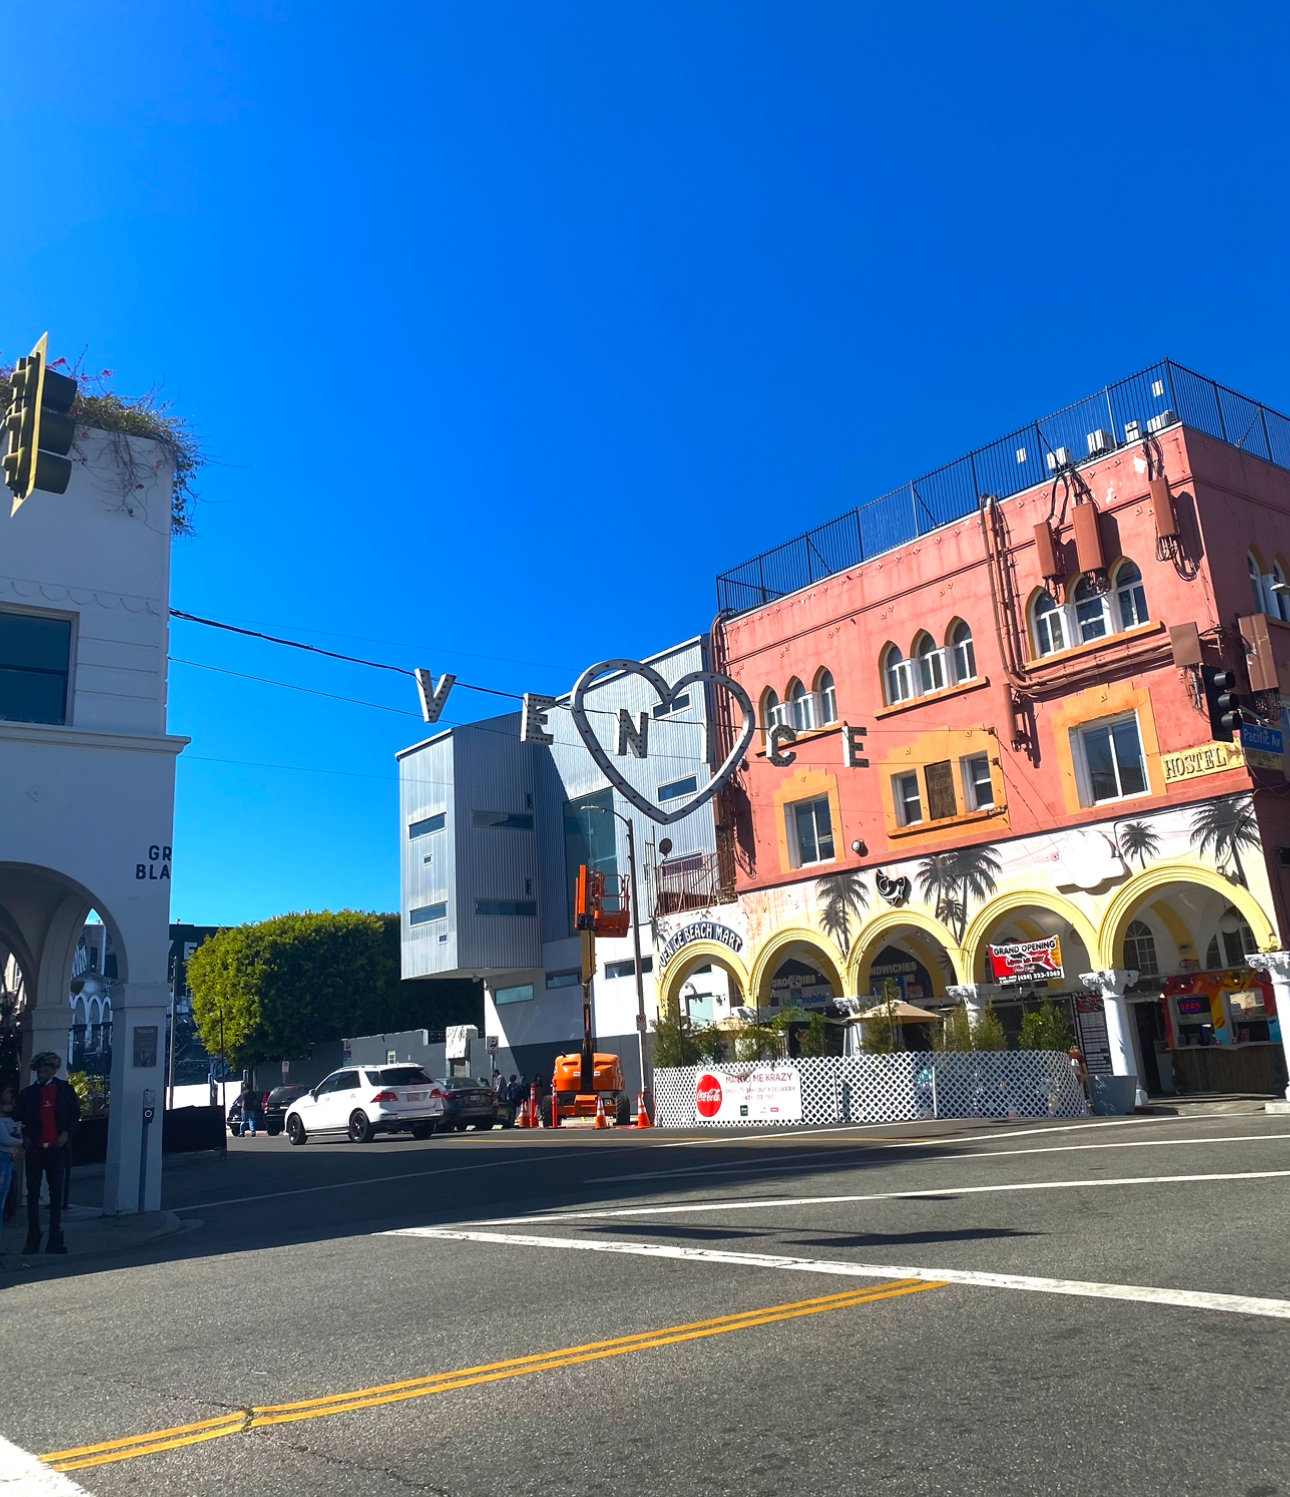 The signature Venice sign hangs between two buildings adjacent to Abbot Kinney Boulevard. Abbot Kinney is a well-known street in Venice beach filled with shops, restaurants and galleries. 